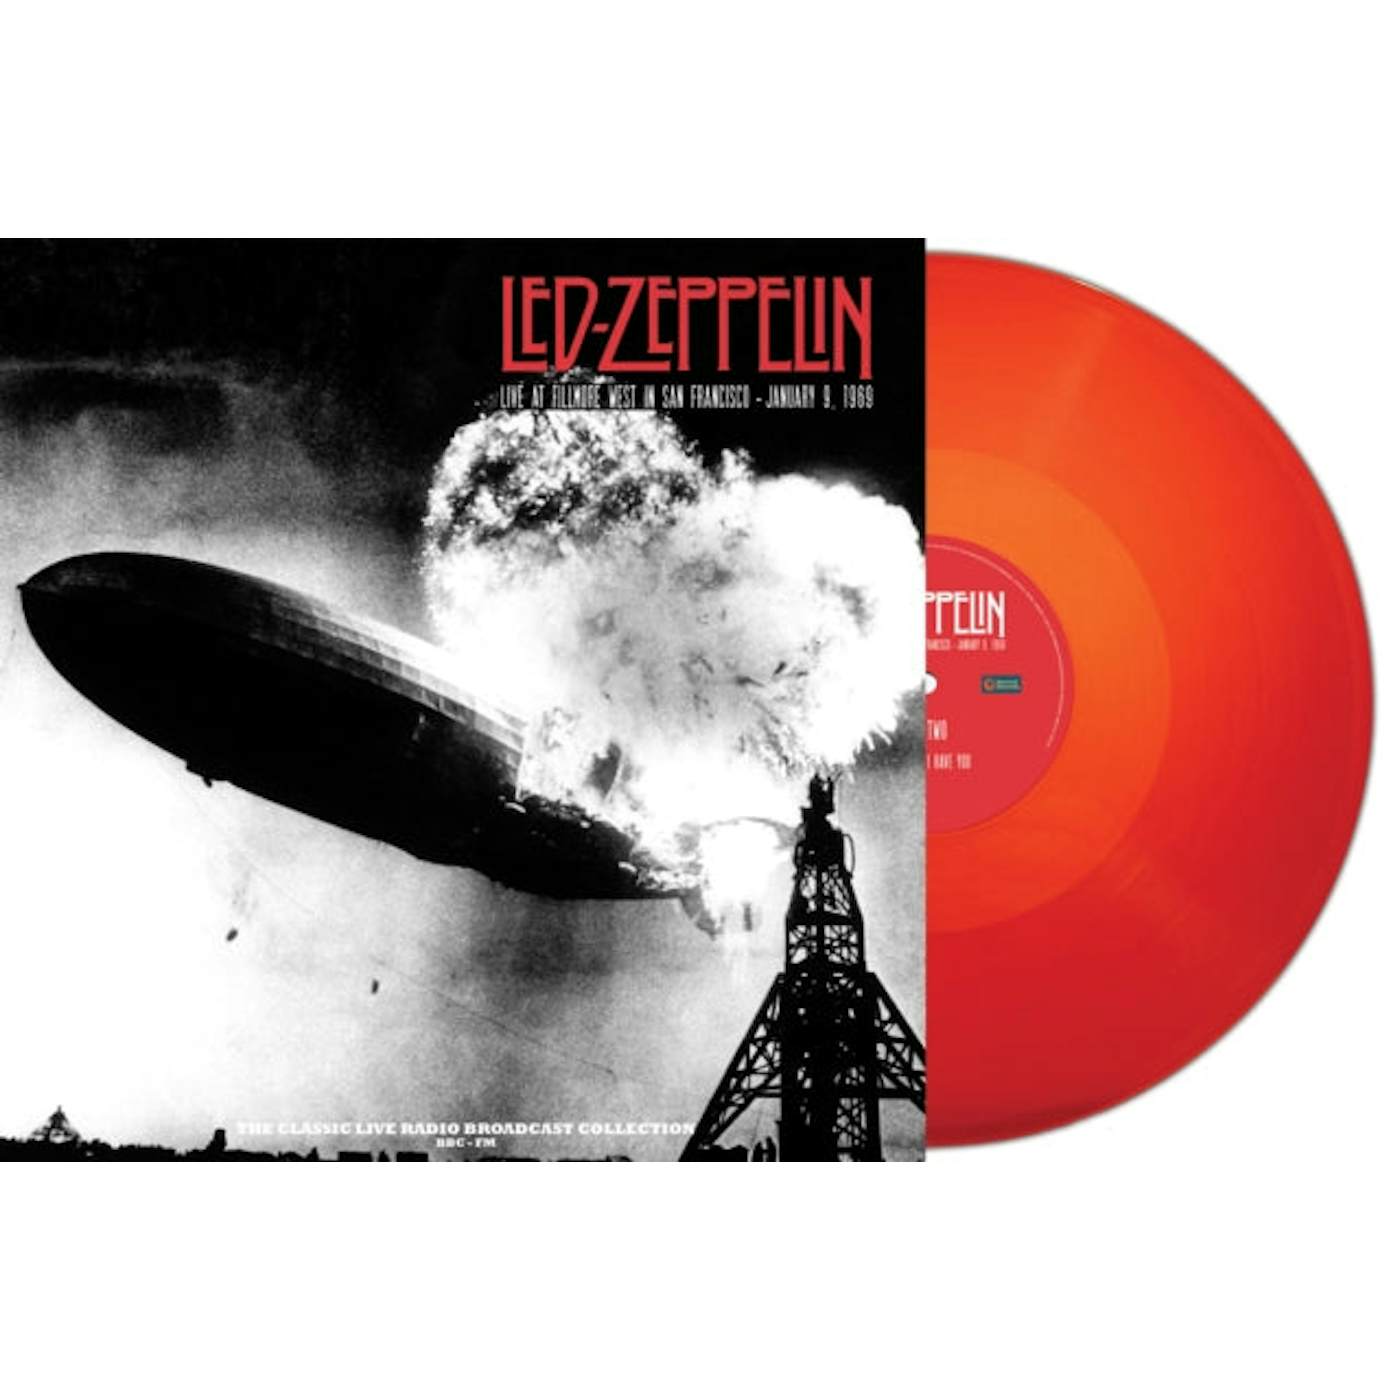 Led Zeppelin LP Vinyl Record - Live At The Fillmore West In San Francisco 9th January 1969 (Coloured Vinyl)